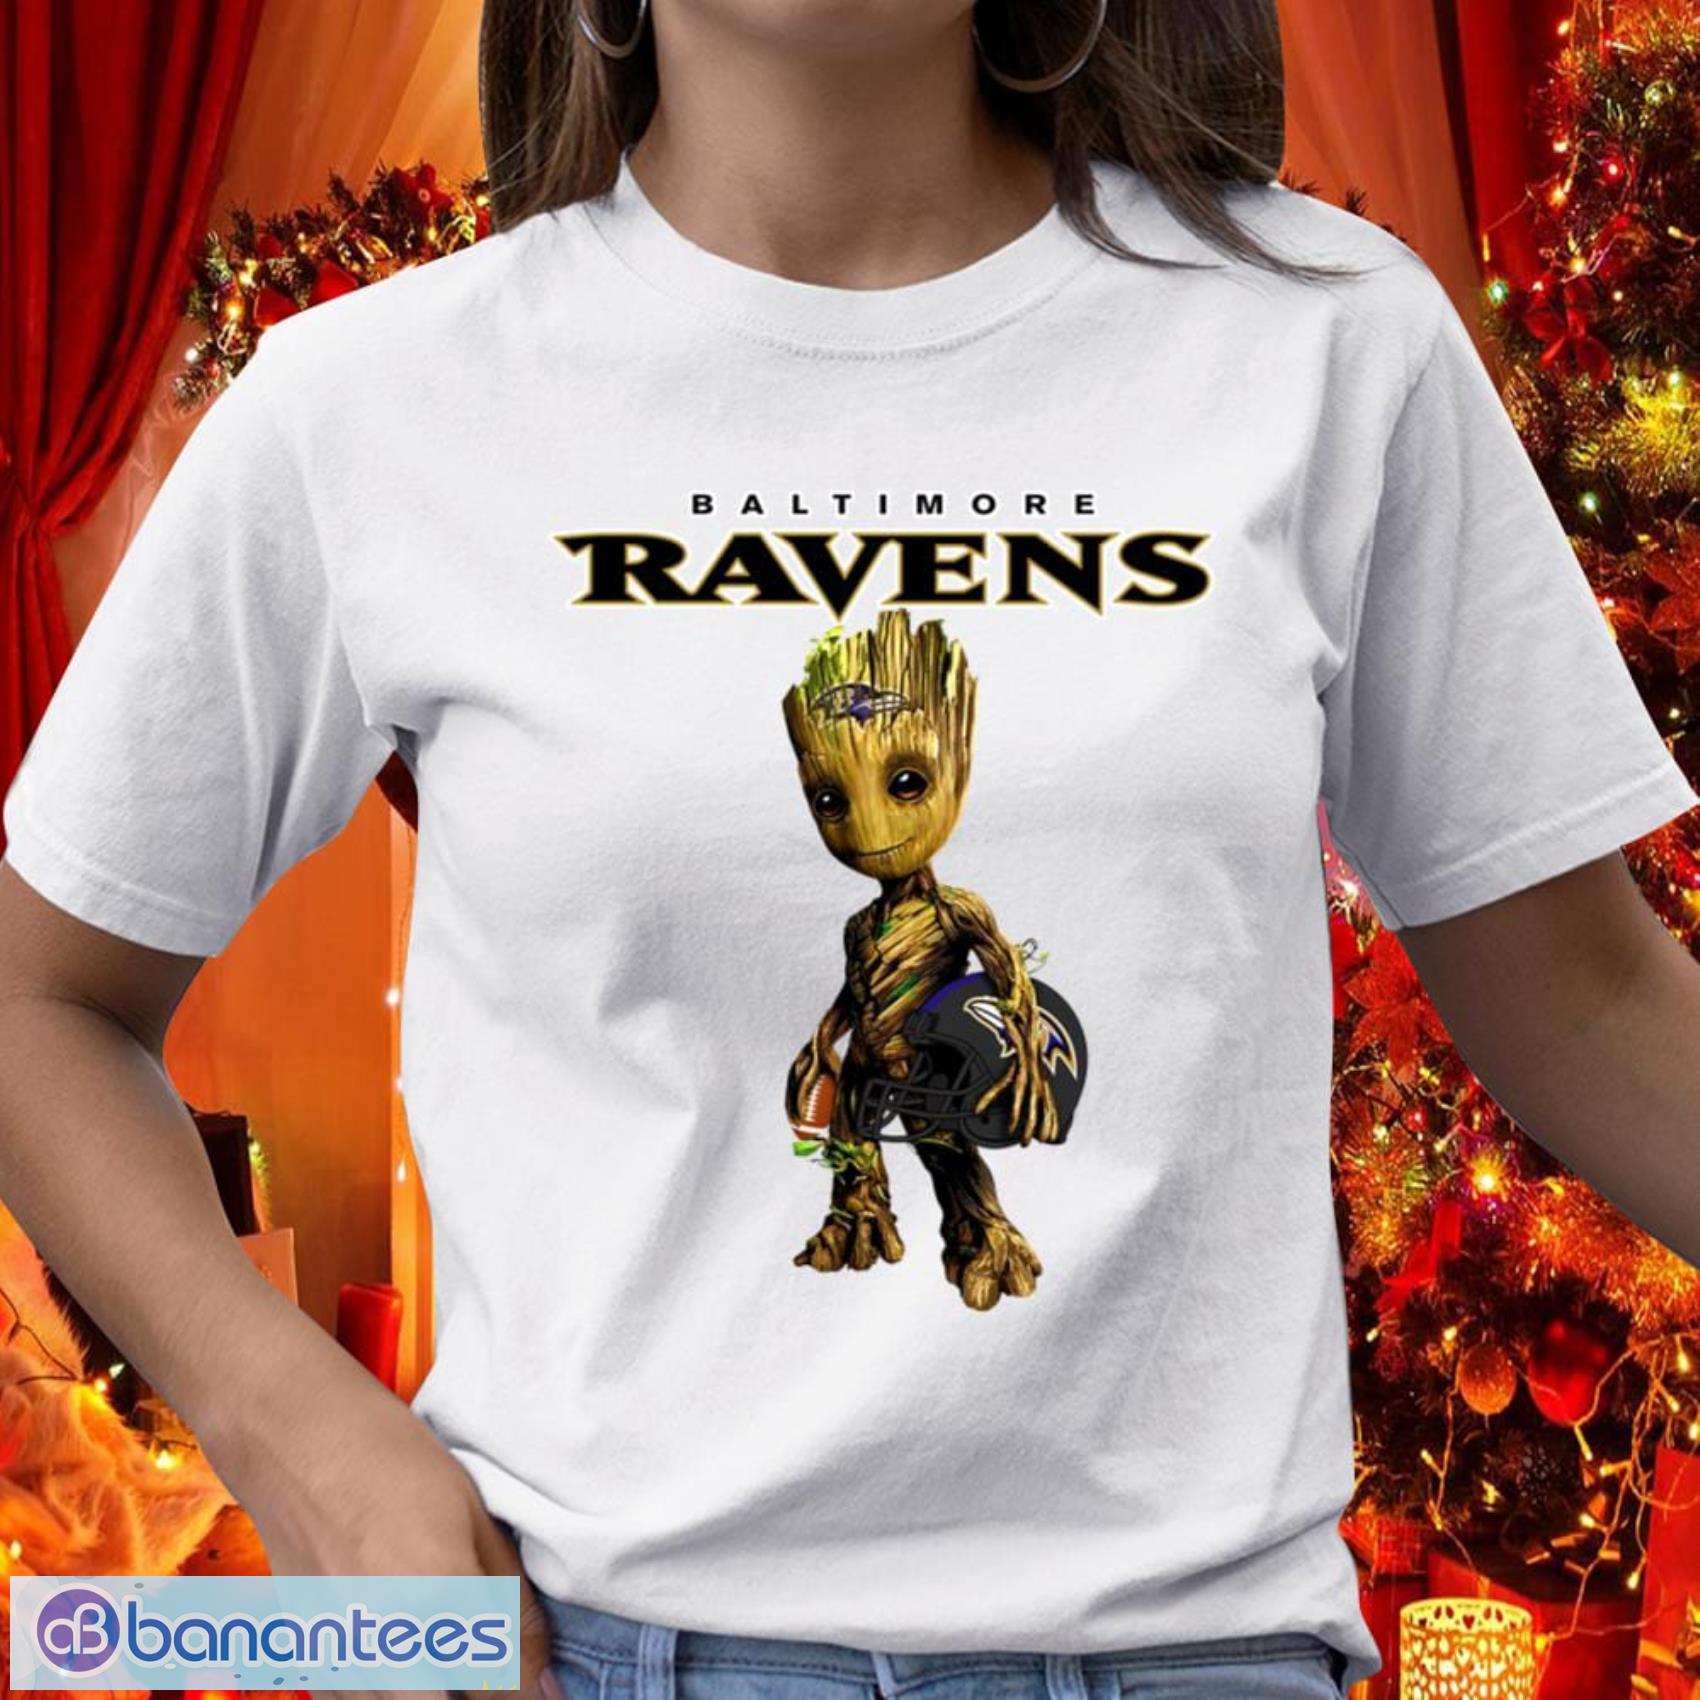 Baltimore Ravens NFL Football Gift Fr Fans Groot Marvel Guardians Of The Galaxy T Shirt - Baltimore Ravens NFL Football Groot Marvel Guardians Of The Galaxy T Shirt_1